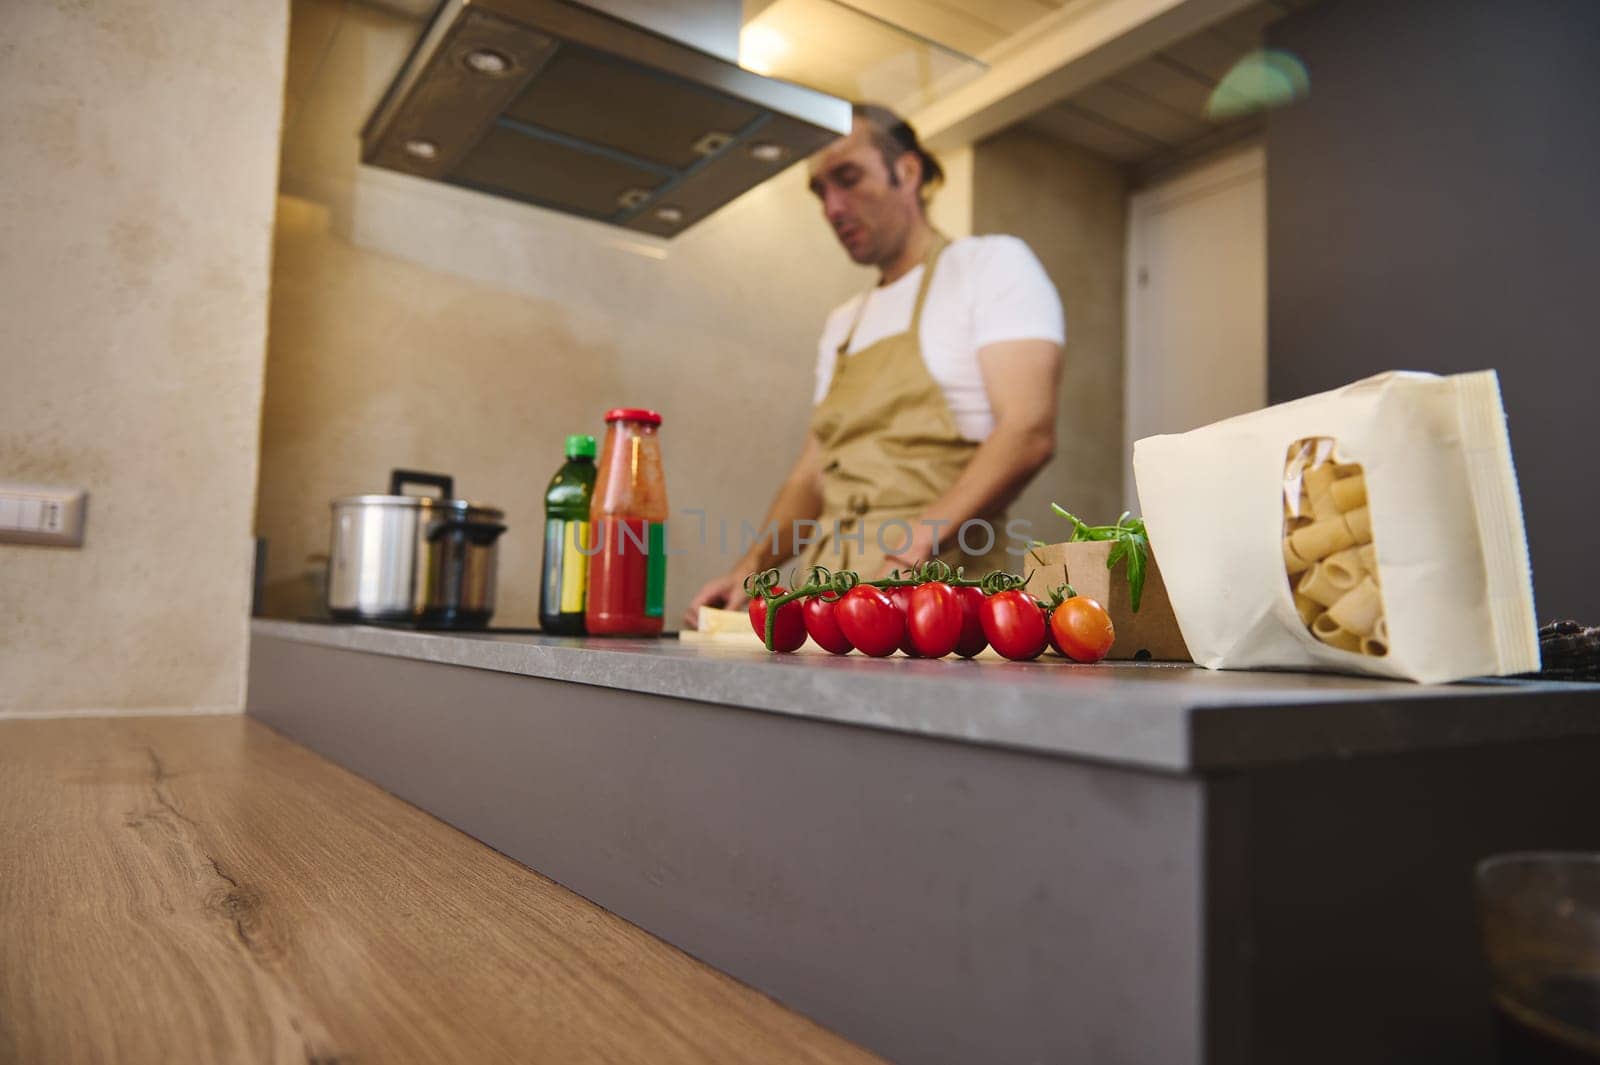 A bunch of red ripe organic tomato cherry and a packet with Italian pasta, against blurred male chef standing at induction stove, adjusting program while cooking dinner in modern home kitchen interior by artgf